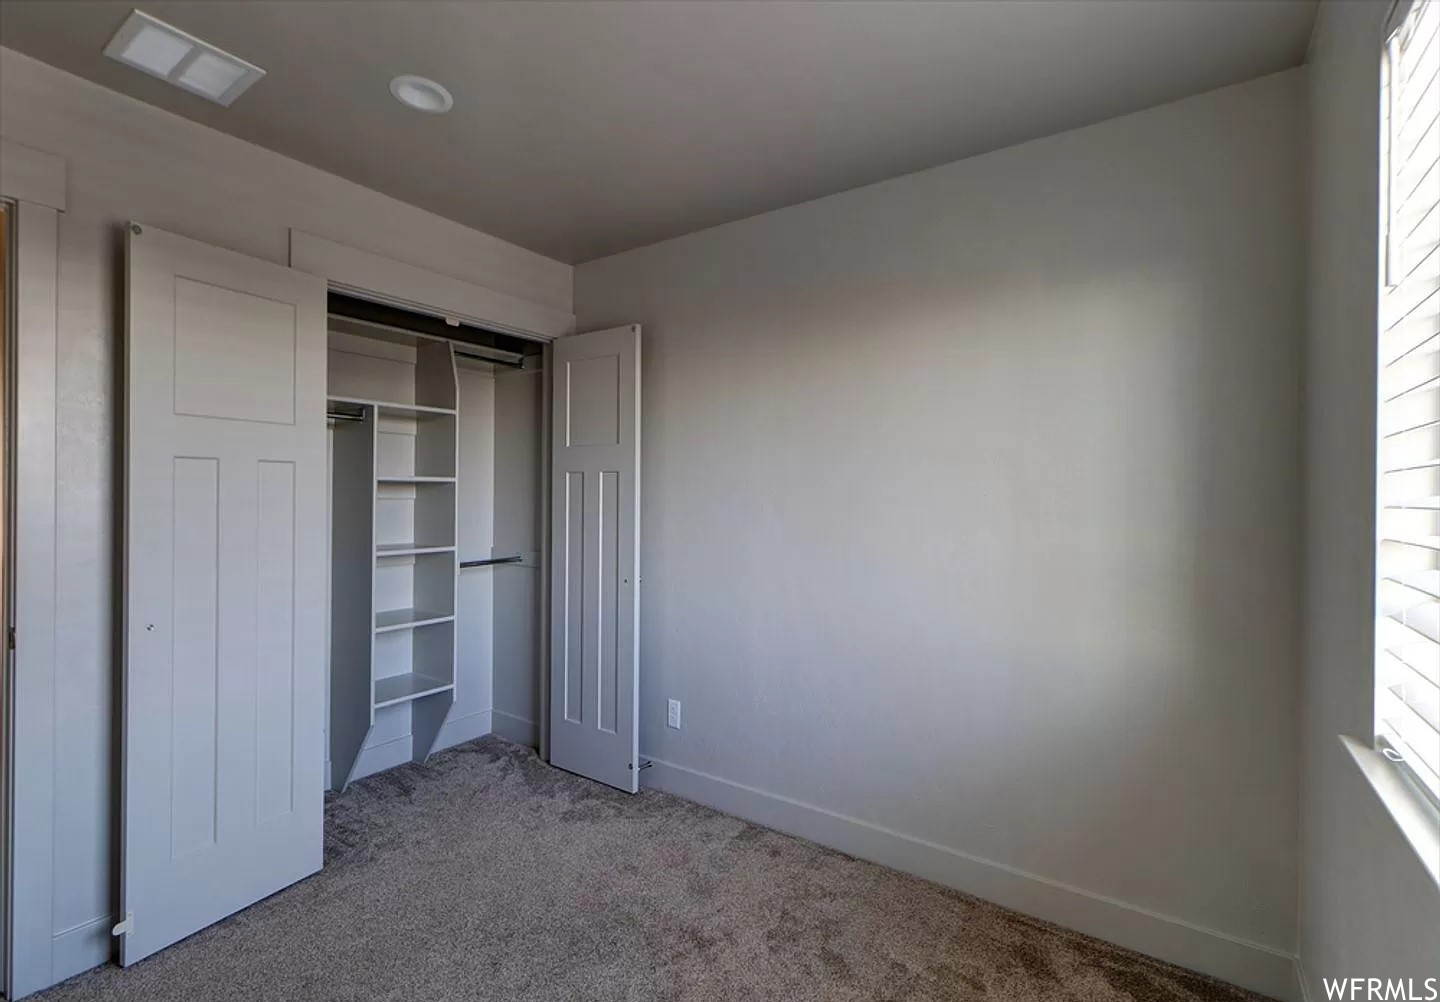 Unfurnished bedroom with multiple windows, a closet, and dark colored carpet